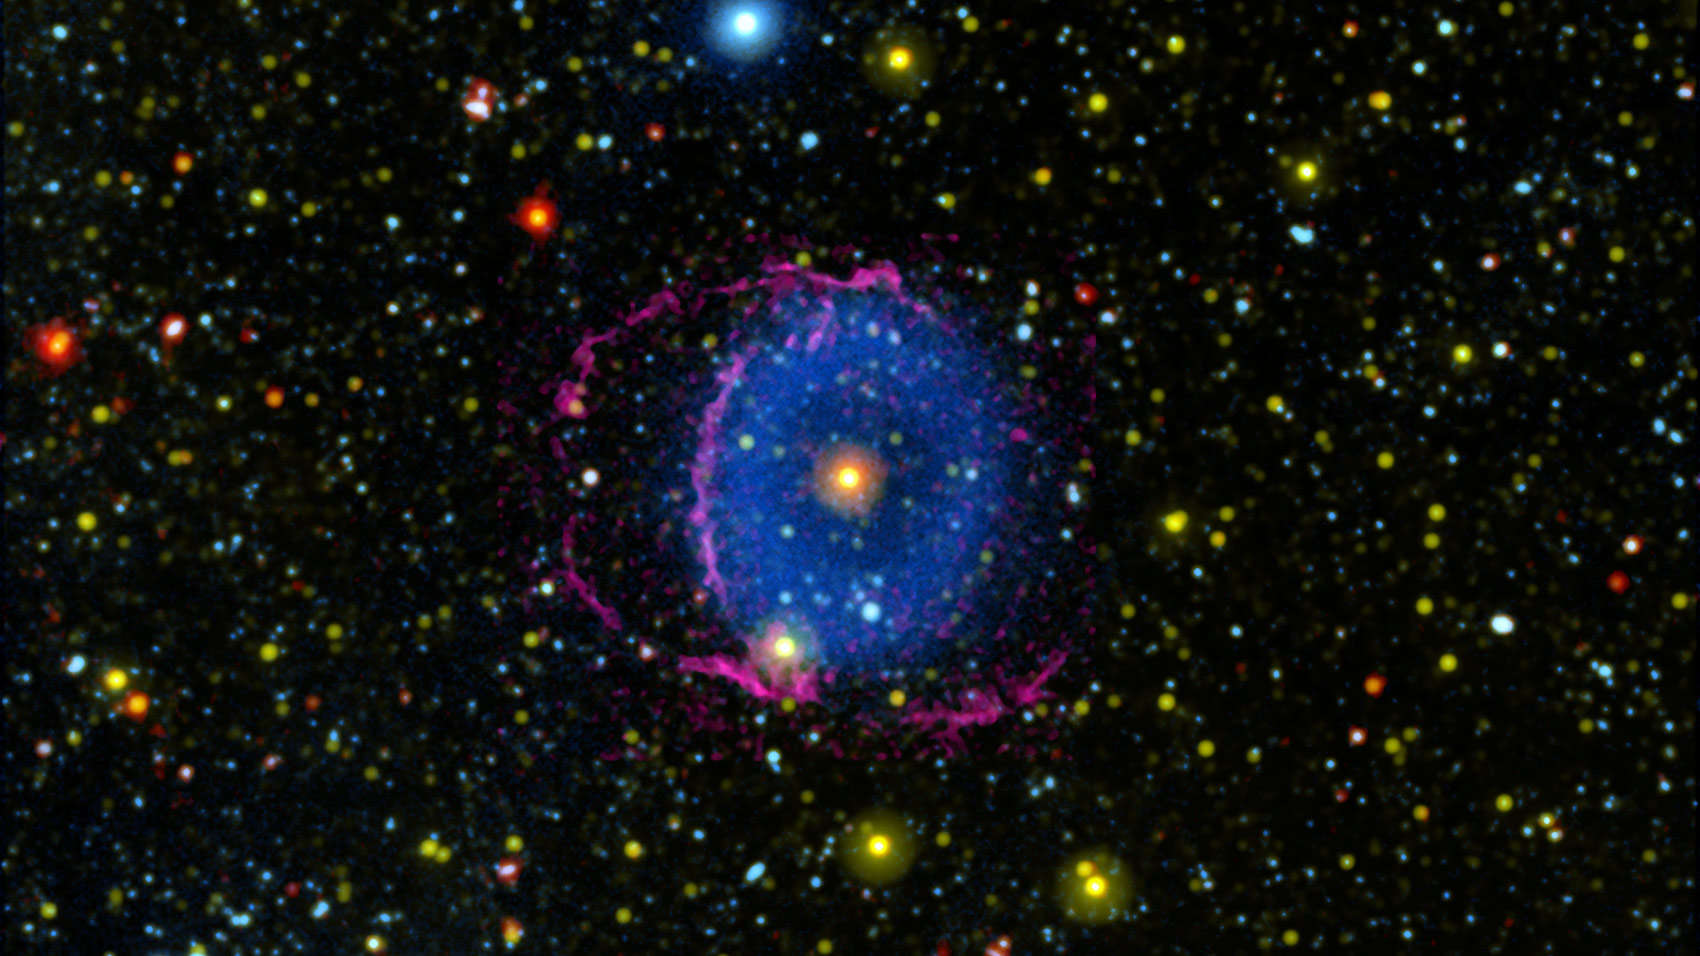 GALEX ultraviolet observations of the Blue Ring Nebula (in blue) together with ground-based observations in visible light (pink) finally reveal the true nature of this object: Two stars that merged into one, blowing out a wind shaped like two thick conica